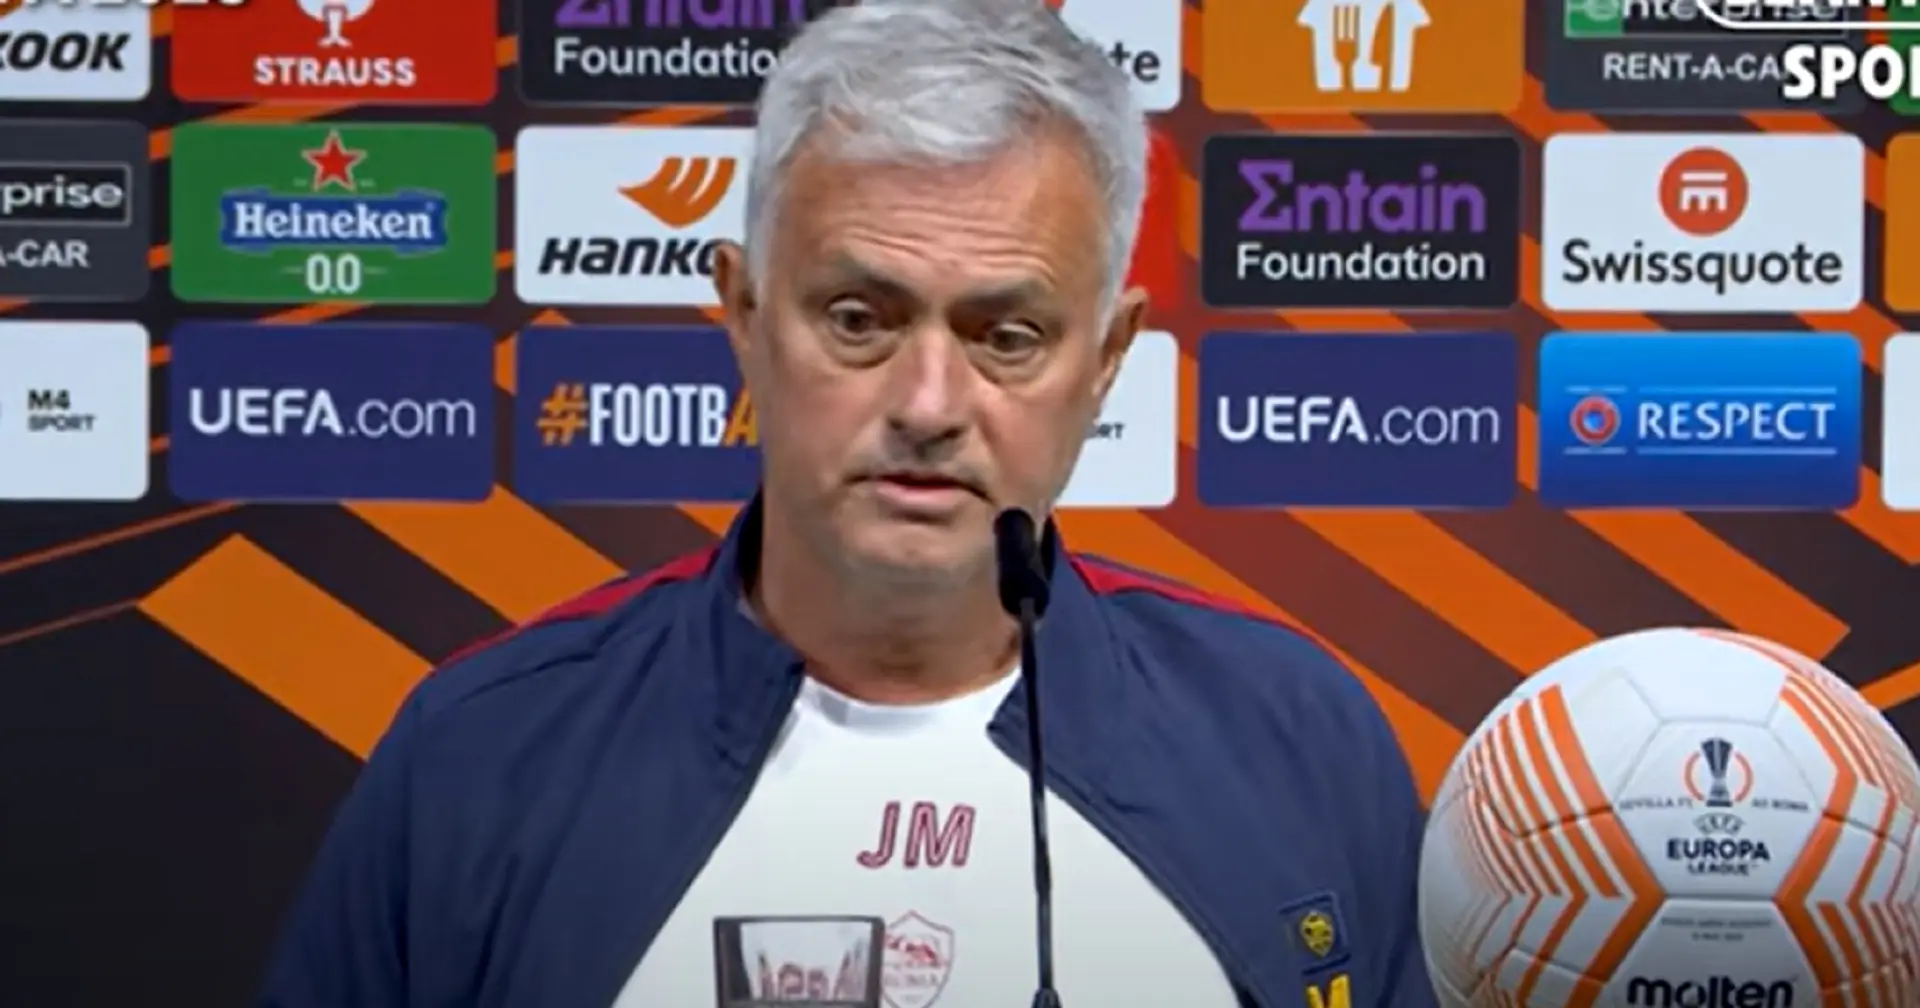 'Our budget is not the same as Sevilla's. We've had a harder route to the final': Jose Mourinho ahead of Europa League final